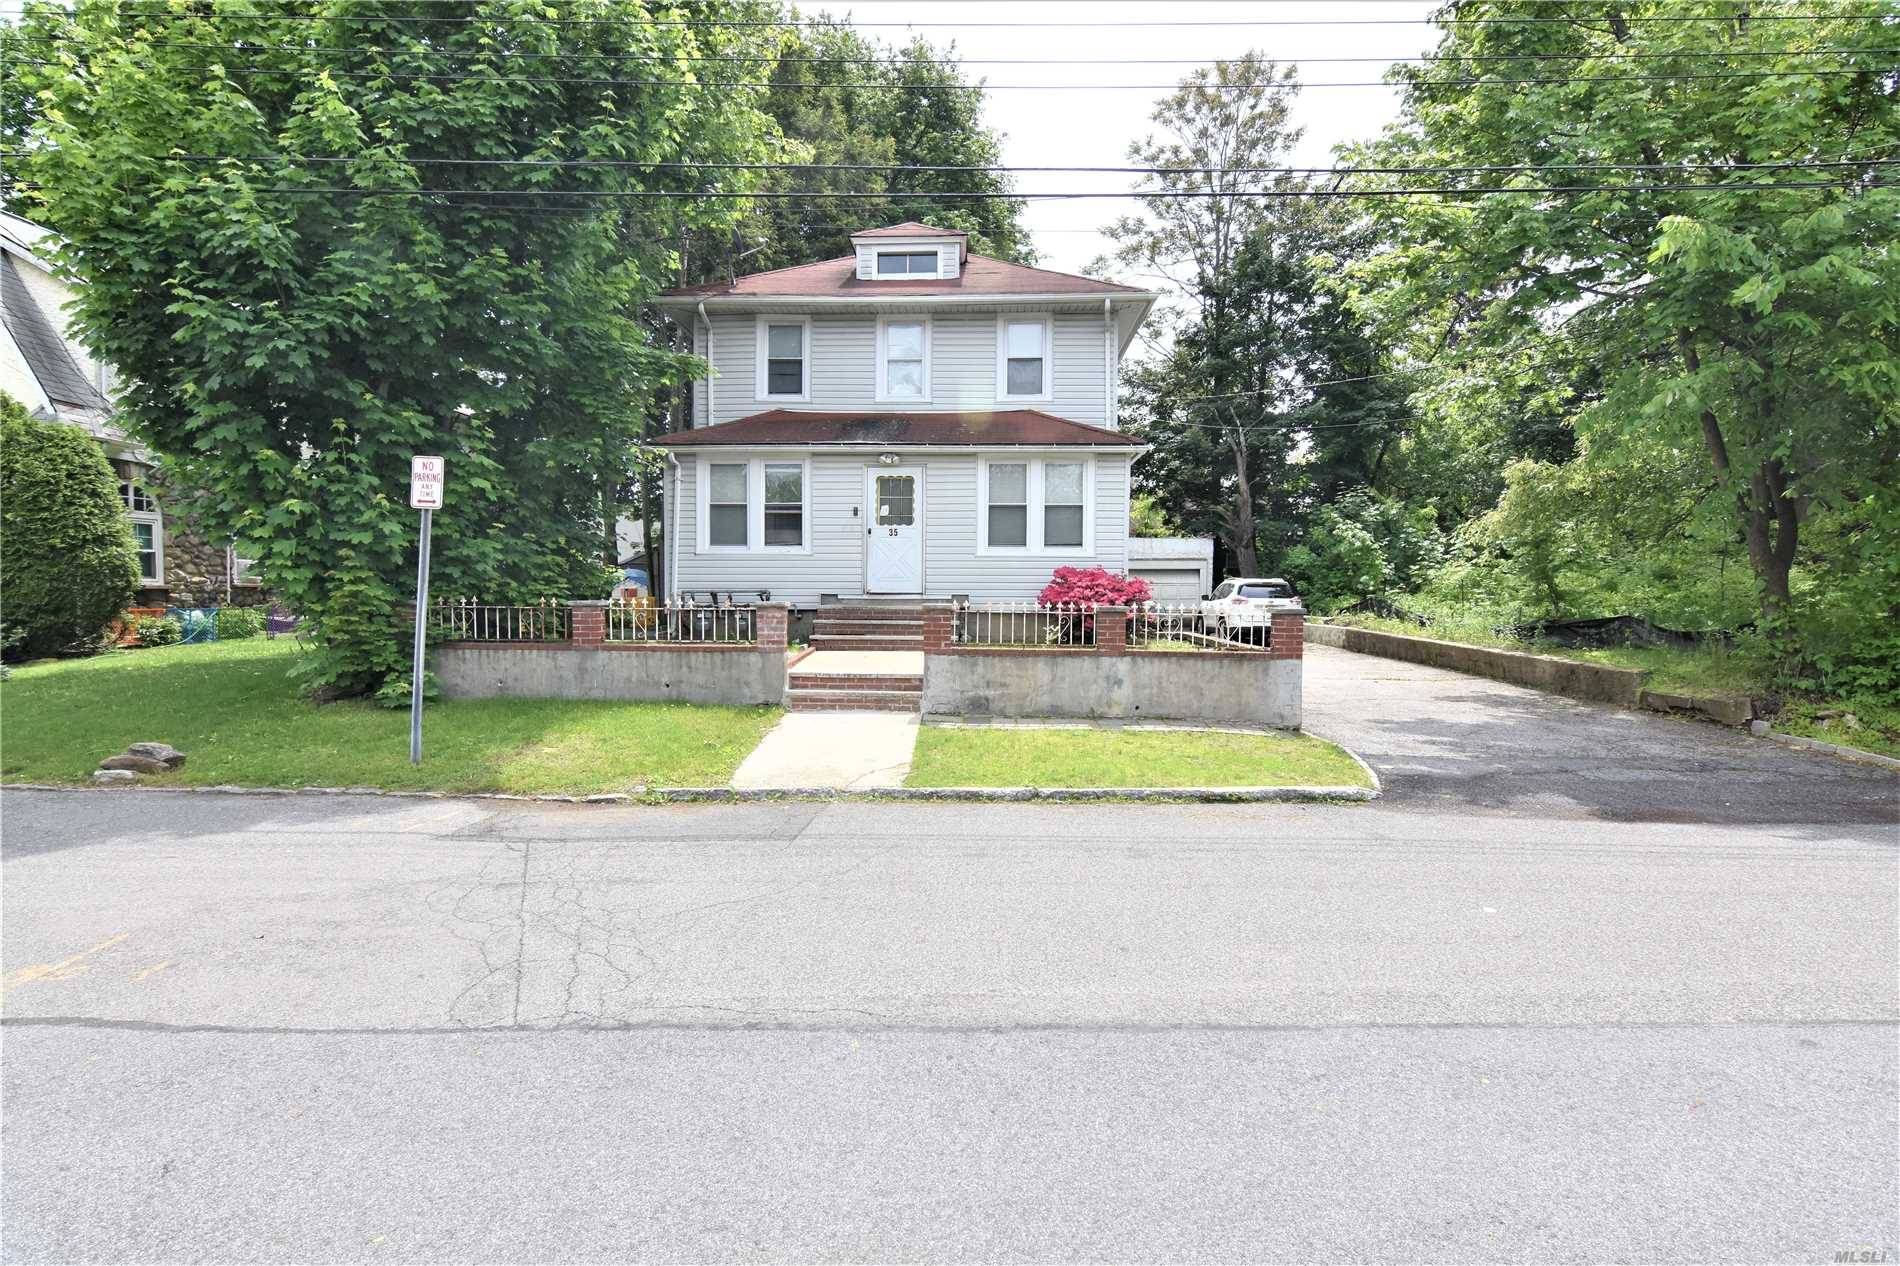 35 Yosemite Ave is a multi family home in White Plains NY 10607.